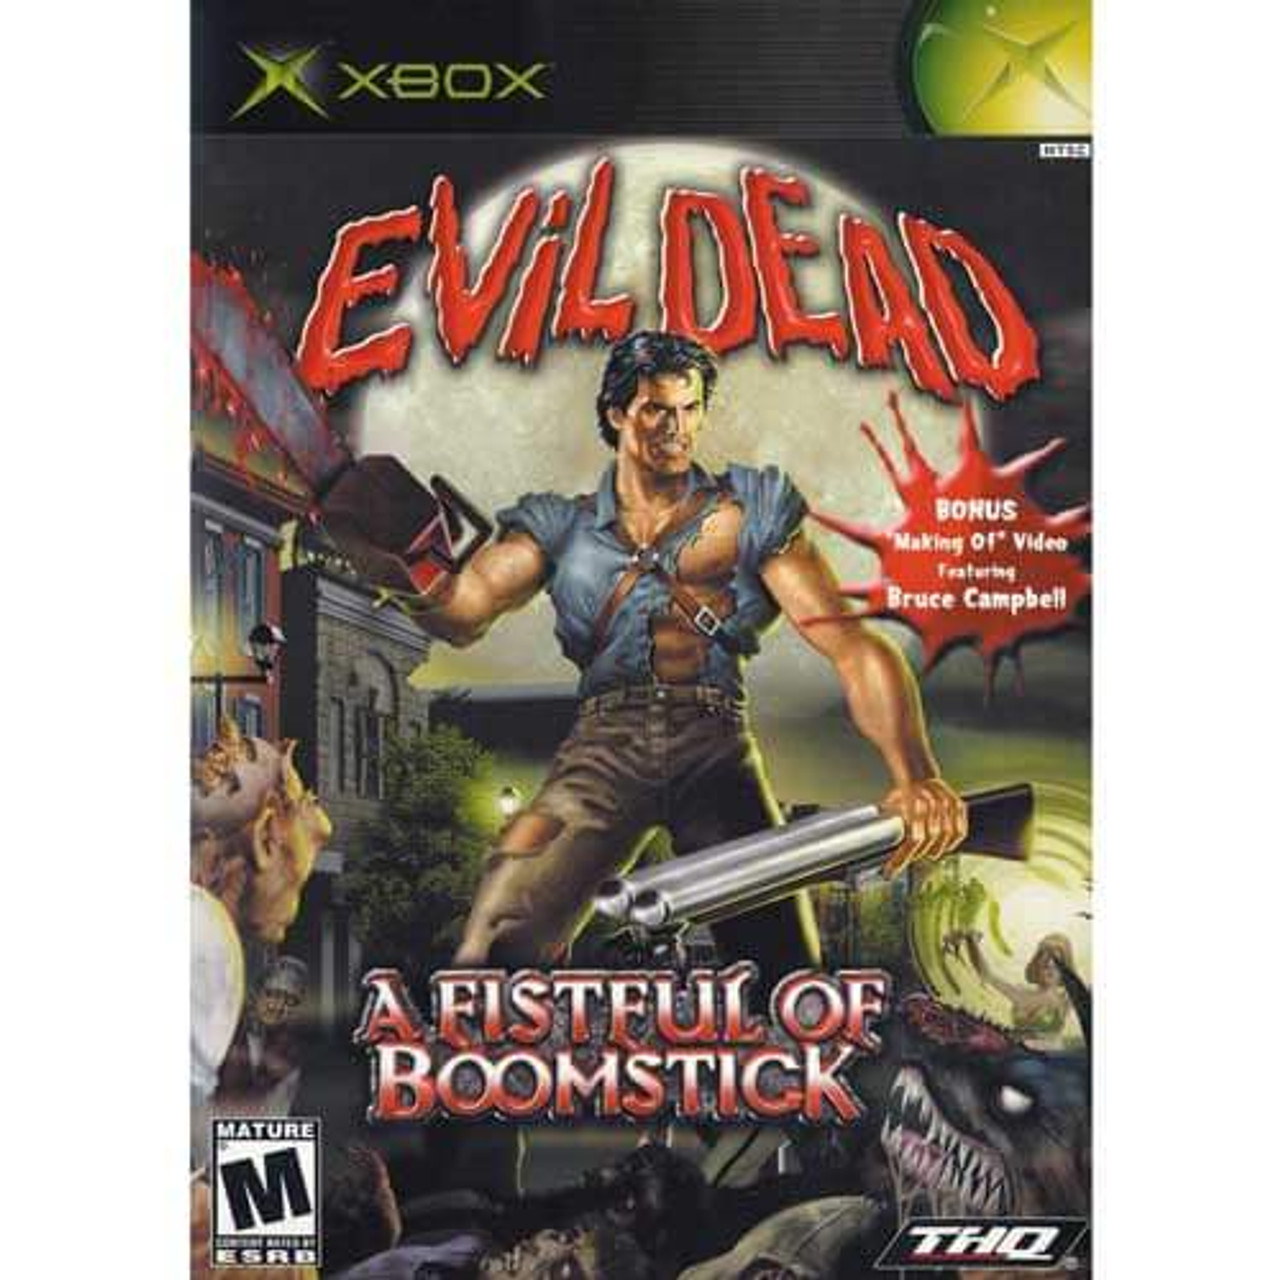 Evil Dead Regeneration PC game Complete in Retail box w/ Disc and Manual